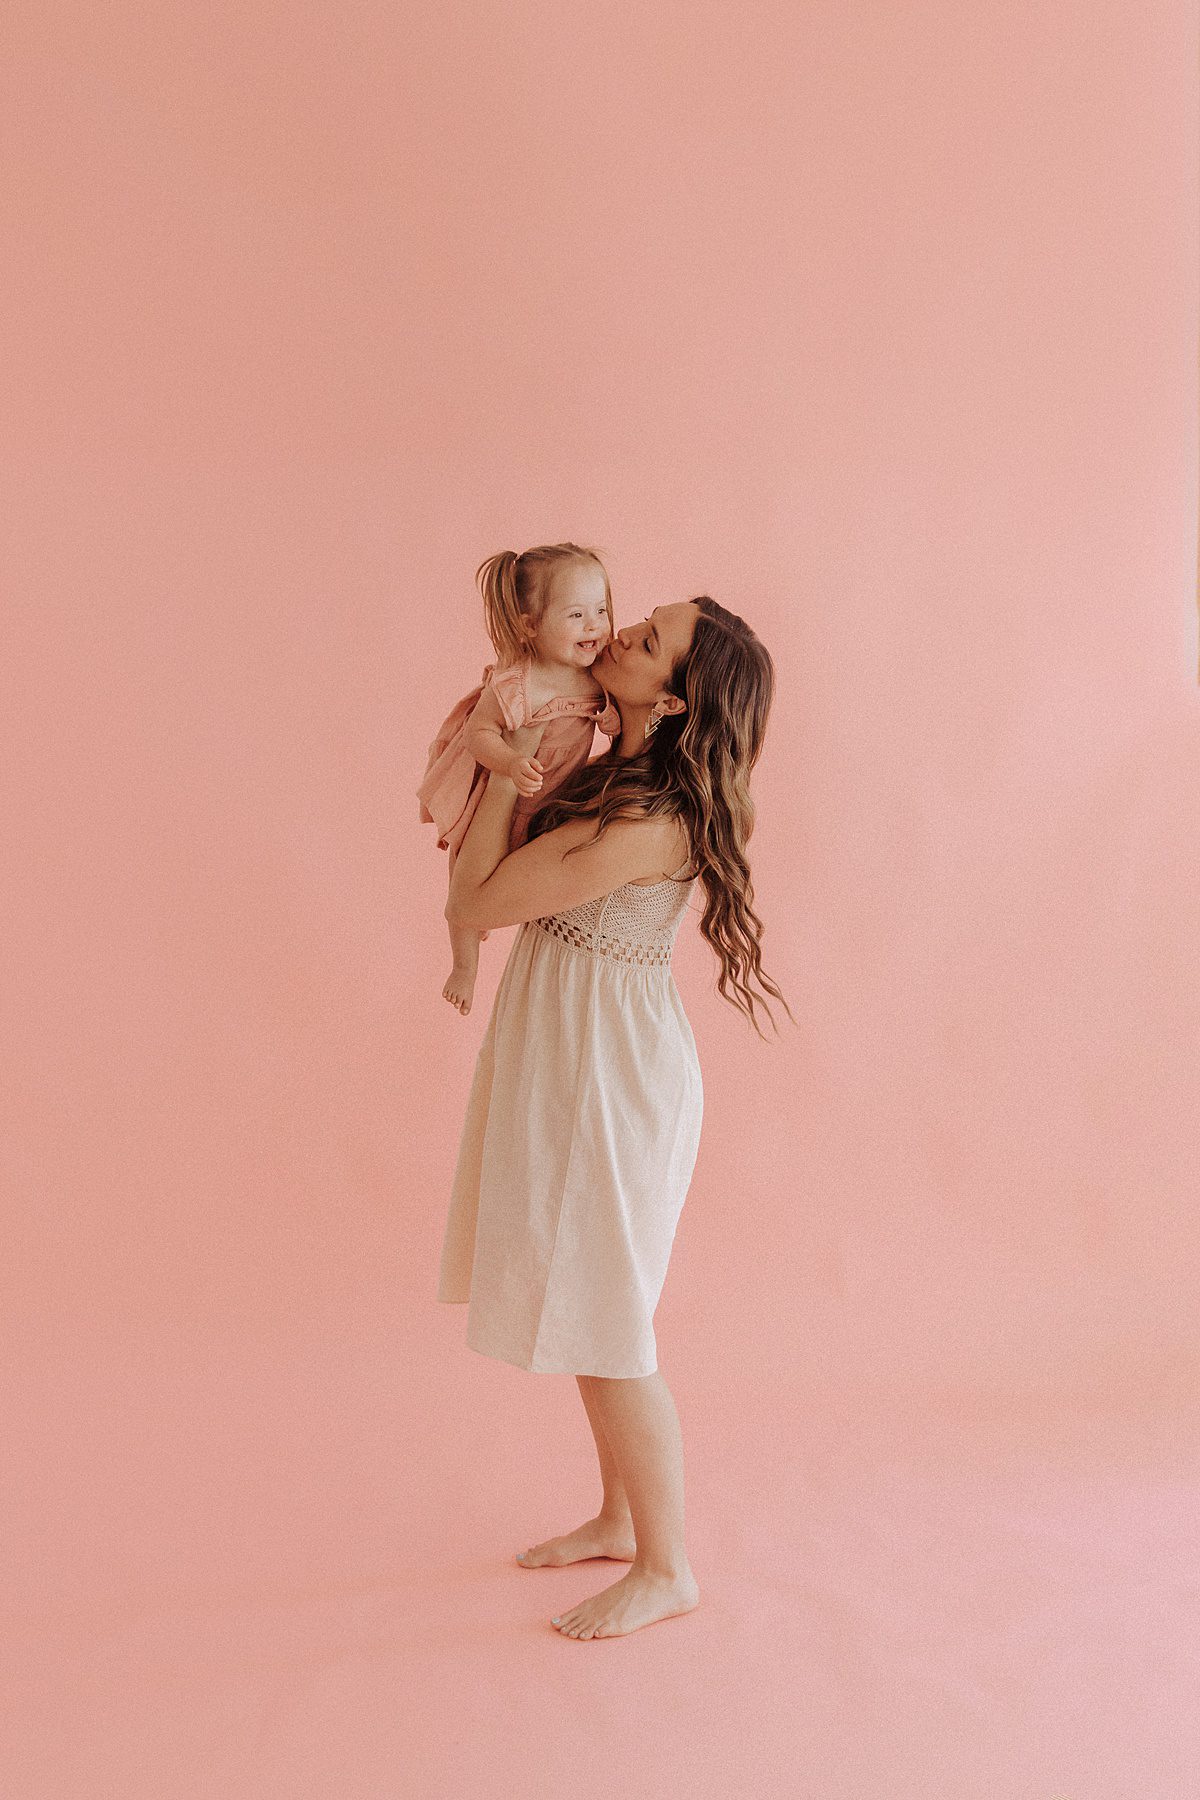 Mother holds her toddler up and gives her a kiss during a photoshoot